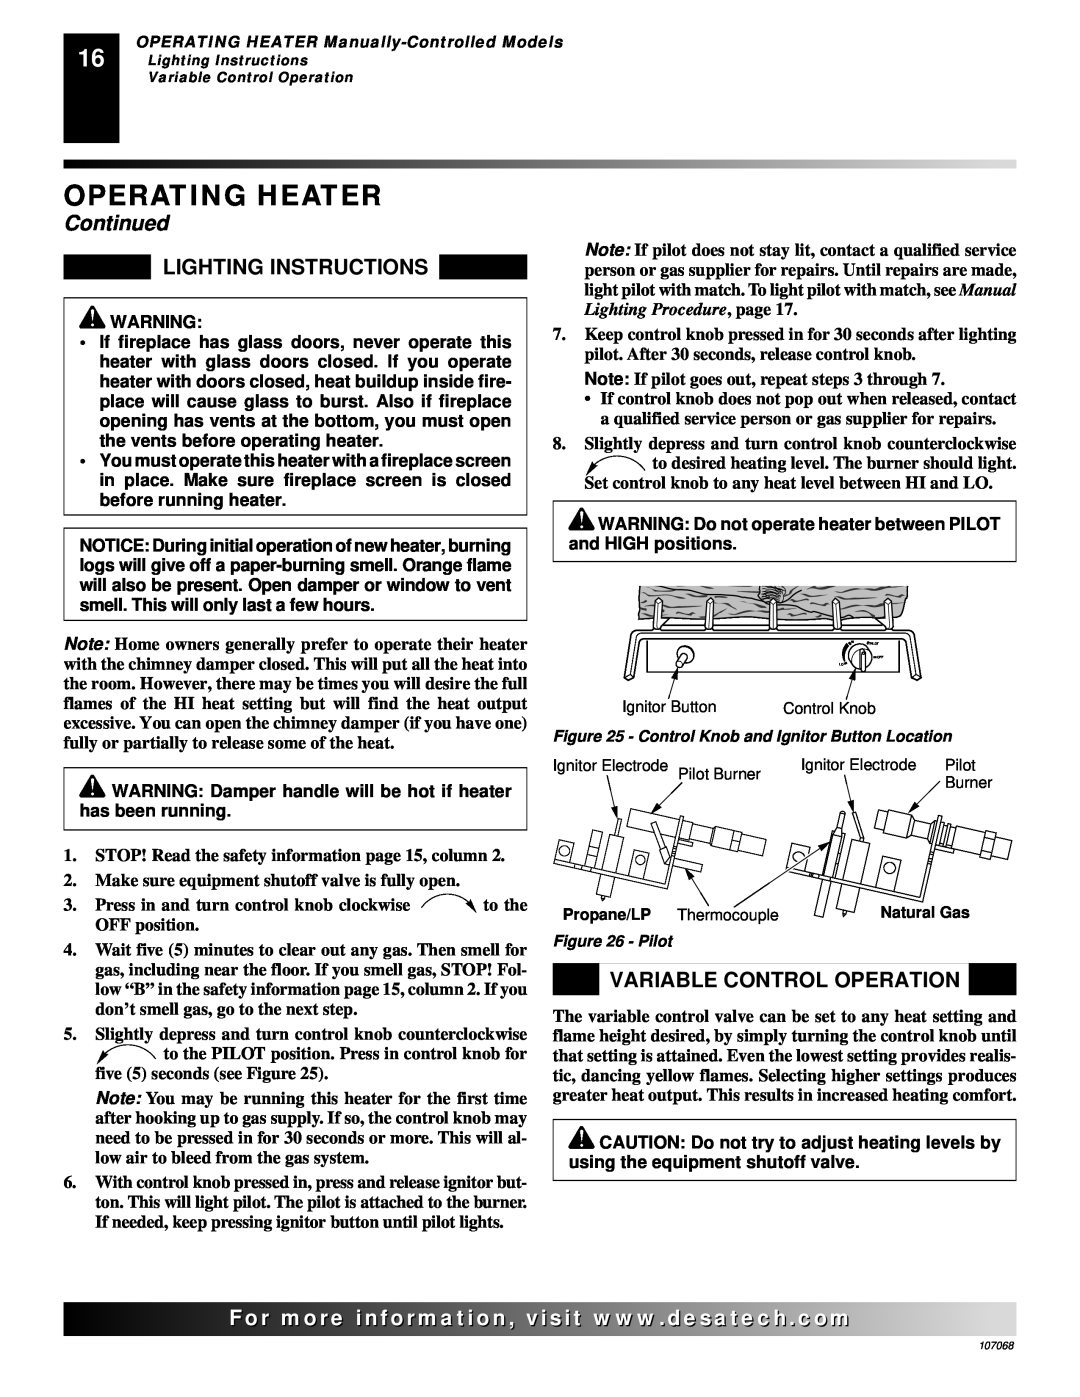 Desa CLD3924NTA, CLD3924PTA, CLD3018NA 24 Lighting Instructions, Variable Control Operation, Operating Heater, Continued 